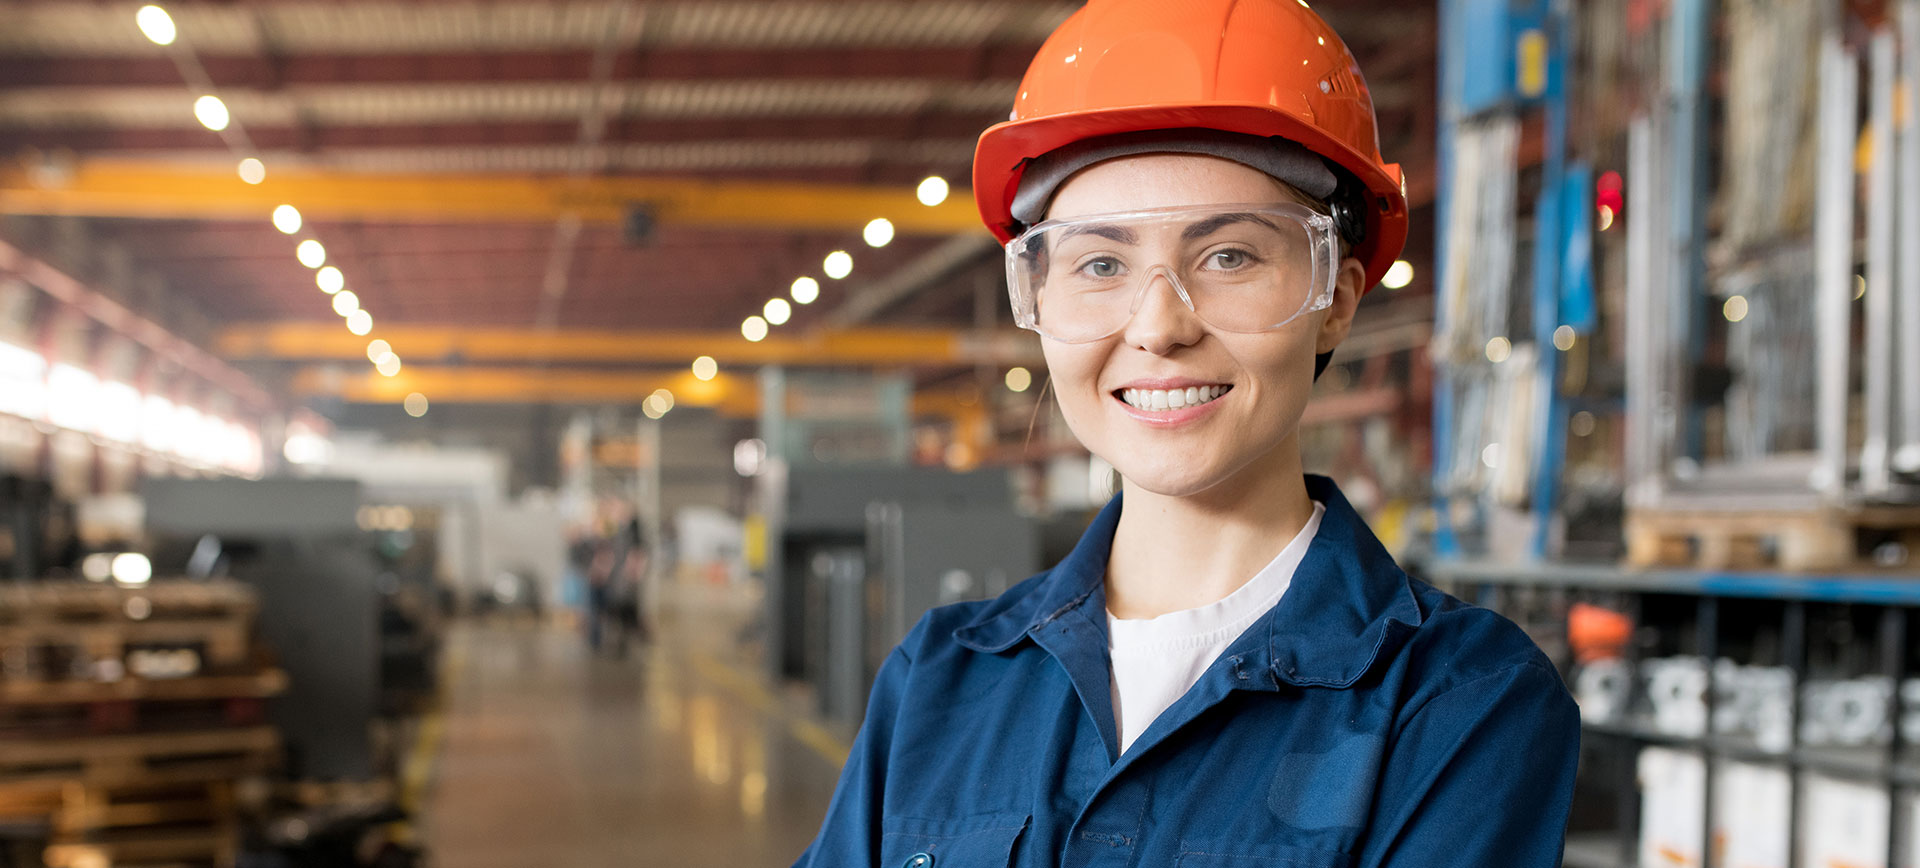 More women switching to careers in skilled trades